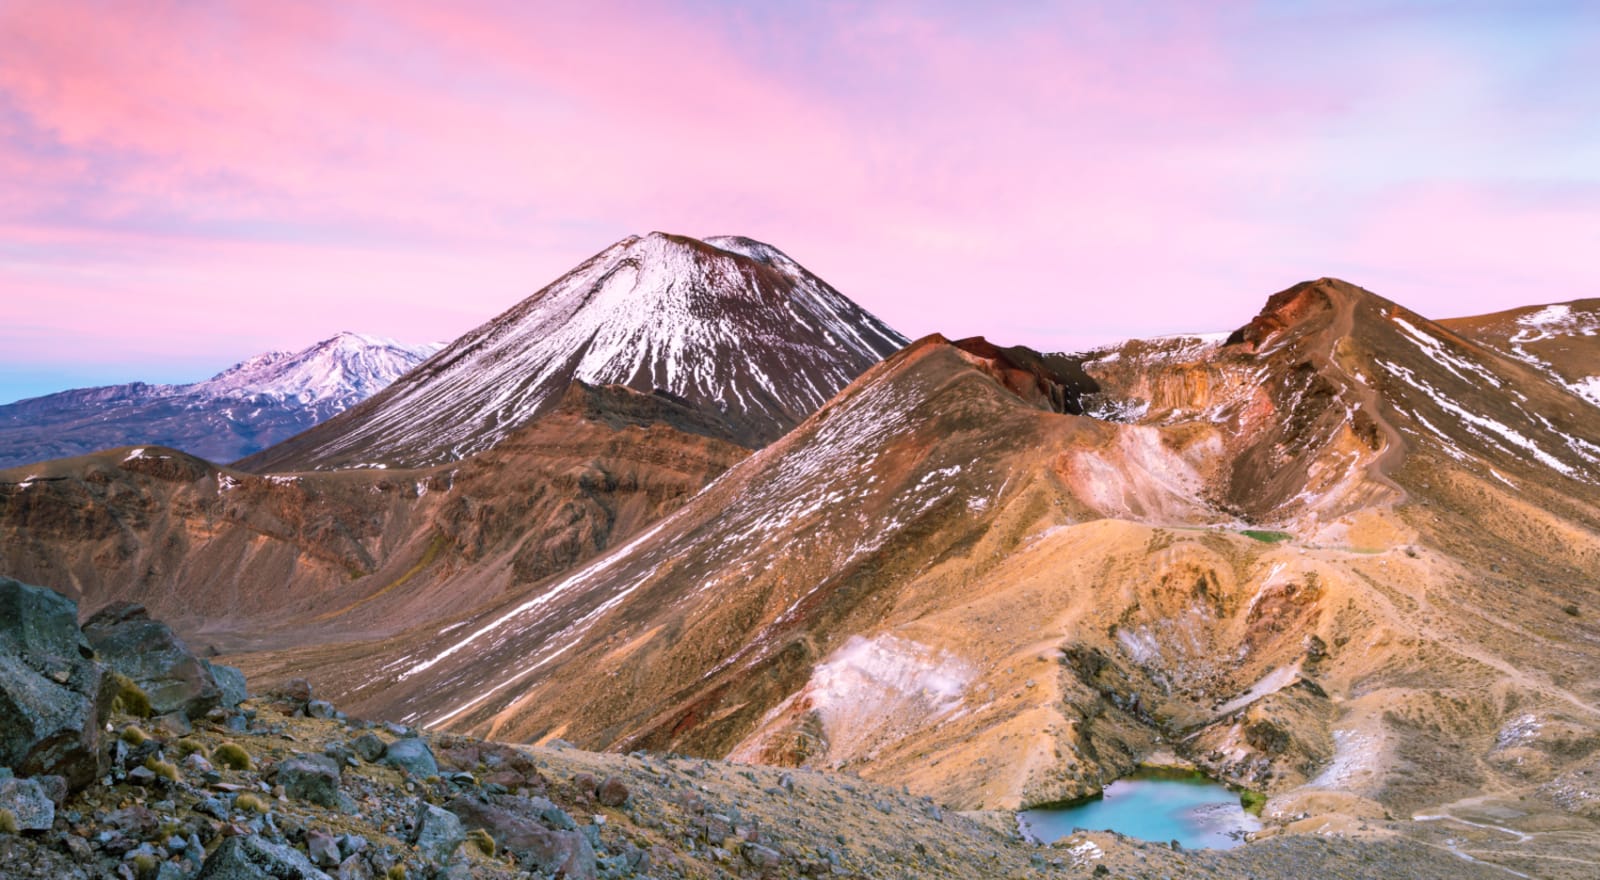 Pink skies over the mountains of Tongariro National Park, New Zealand